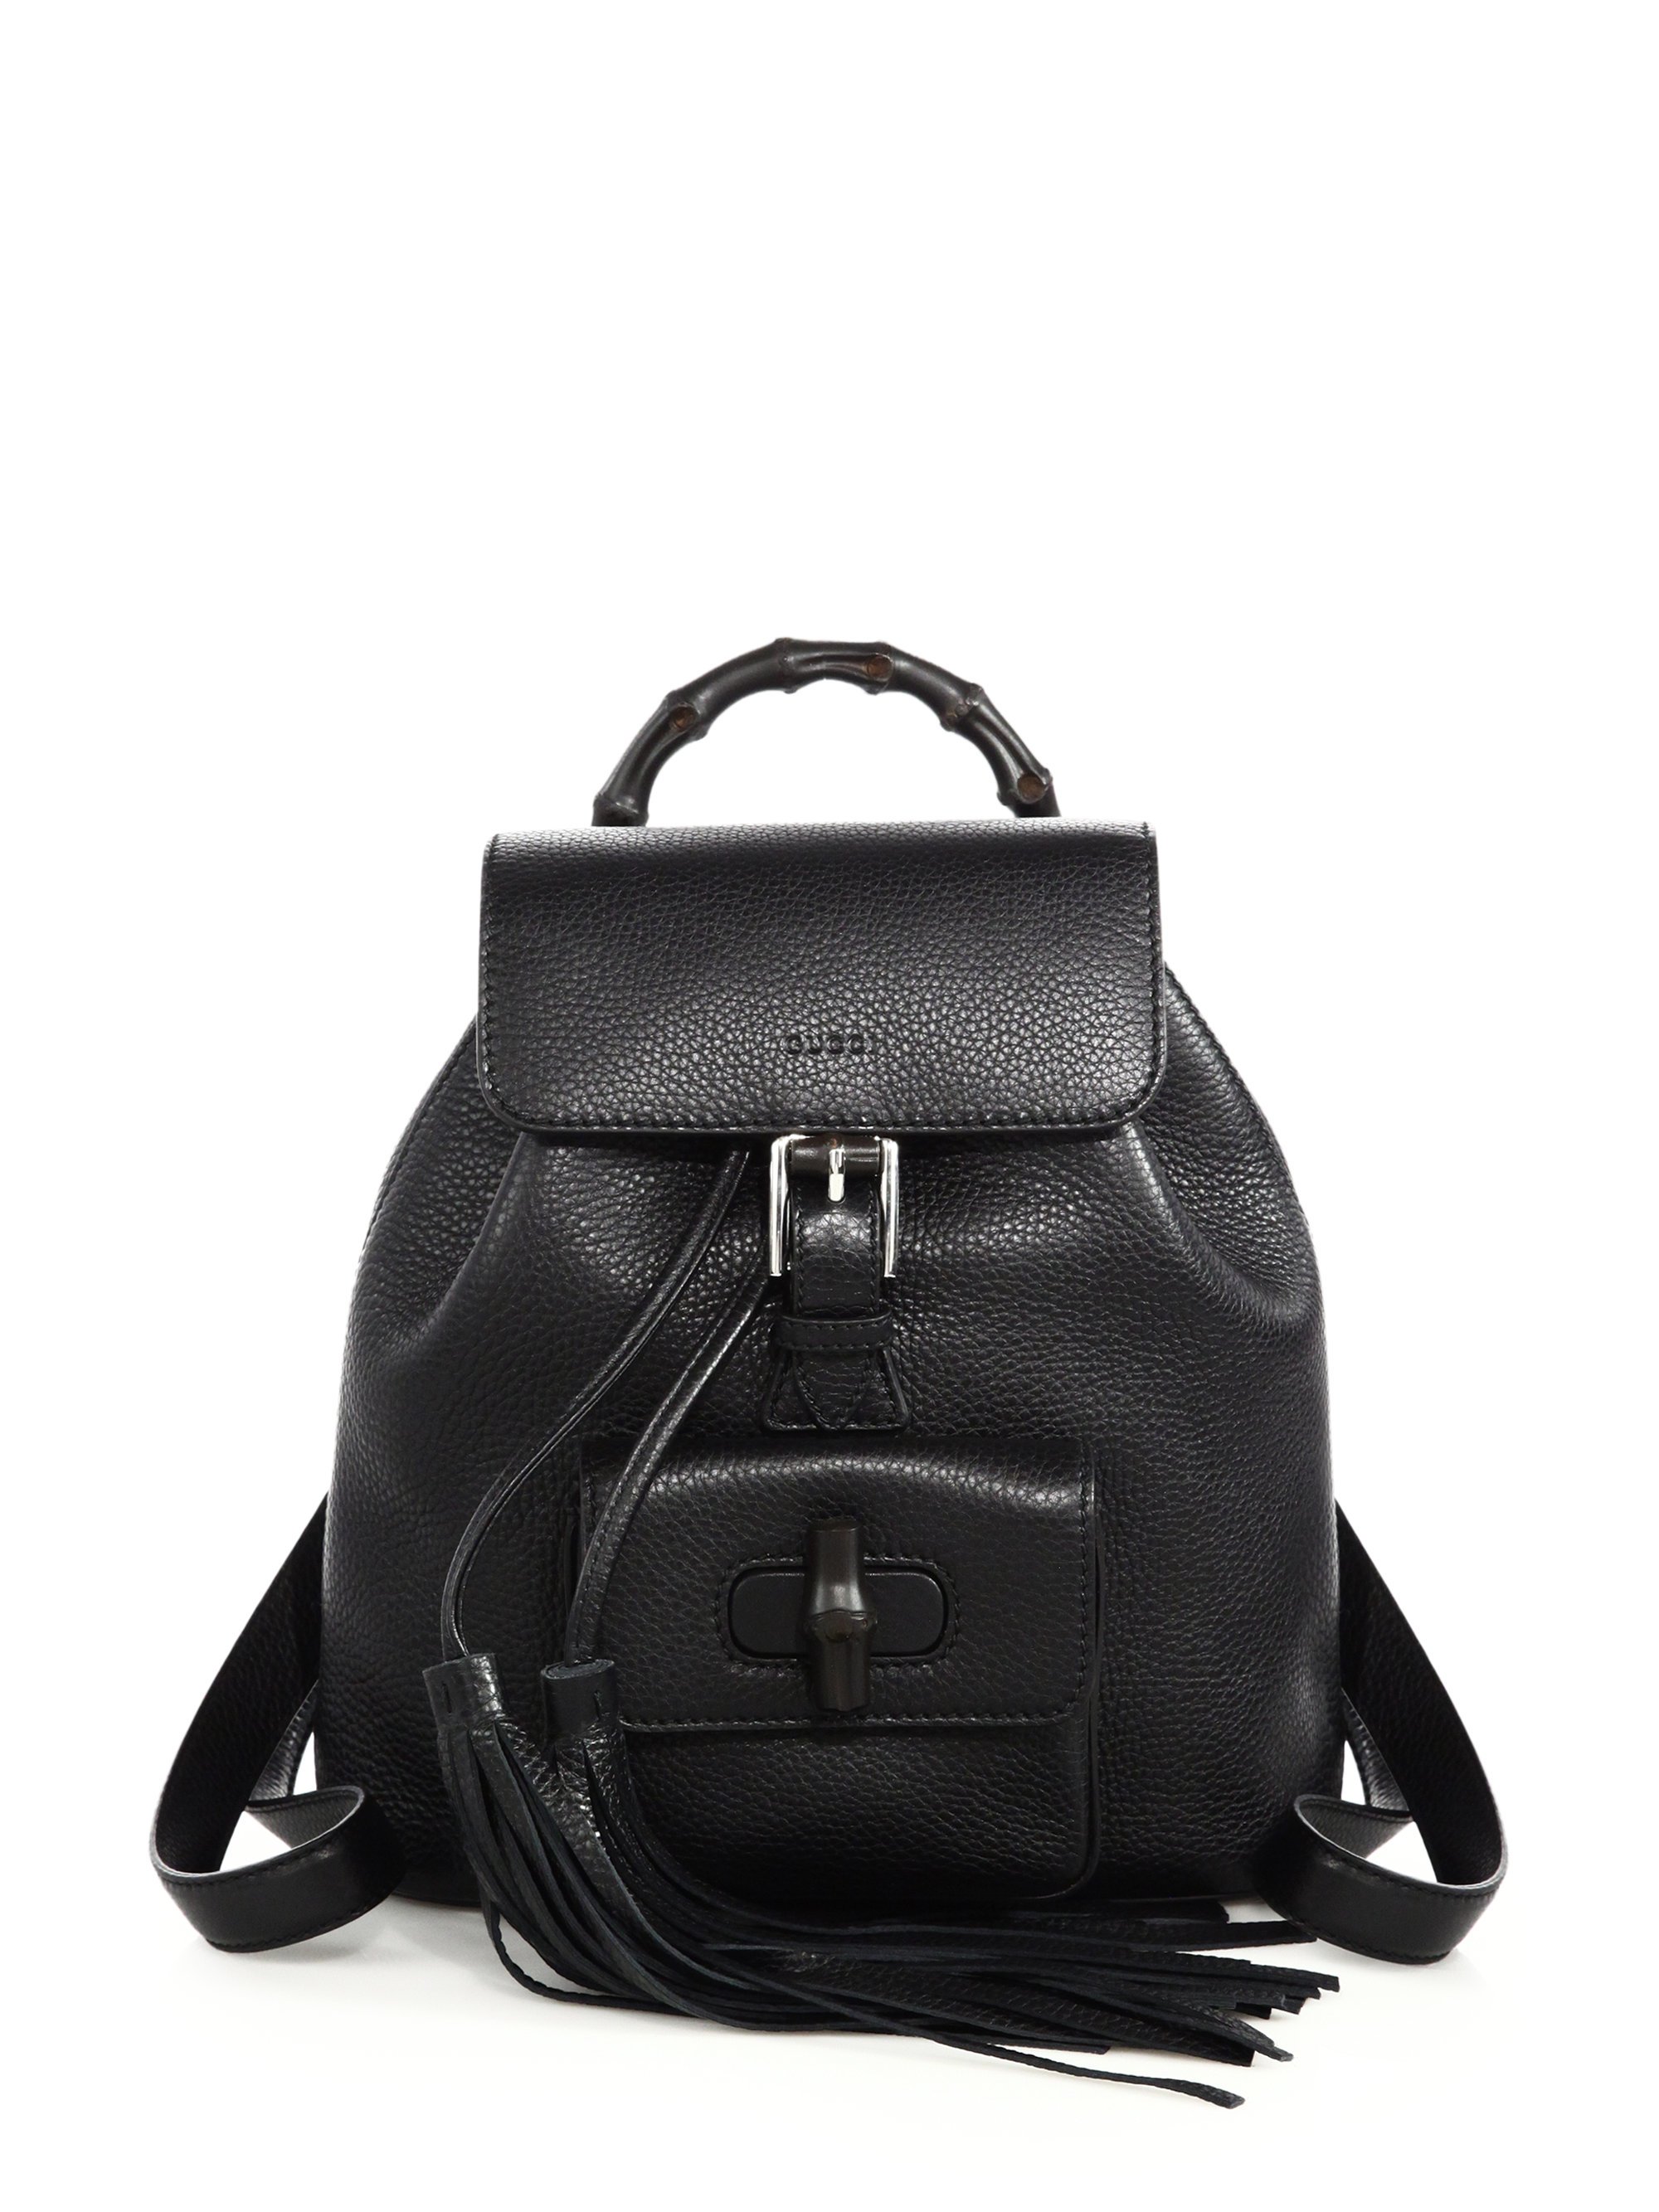 Gucci Bamboo Leather Backpack in Black | Lyst